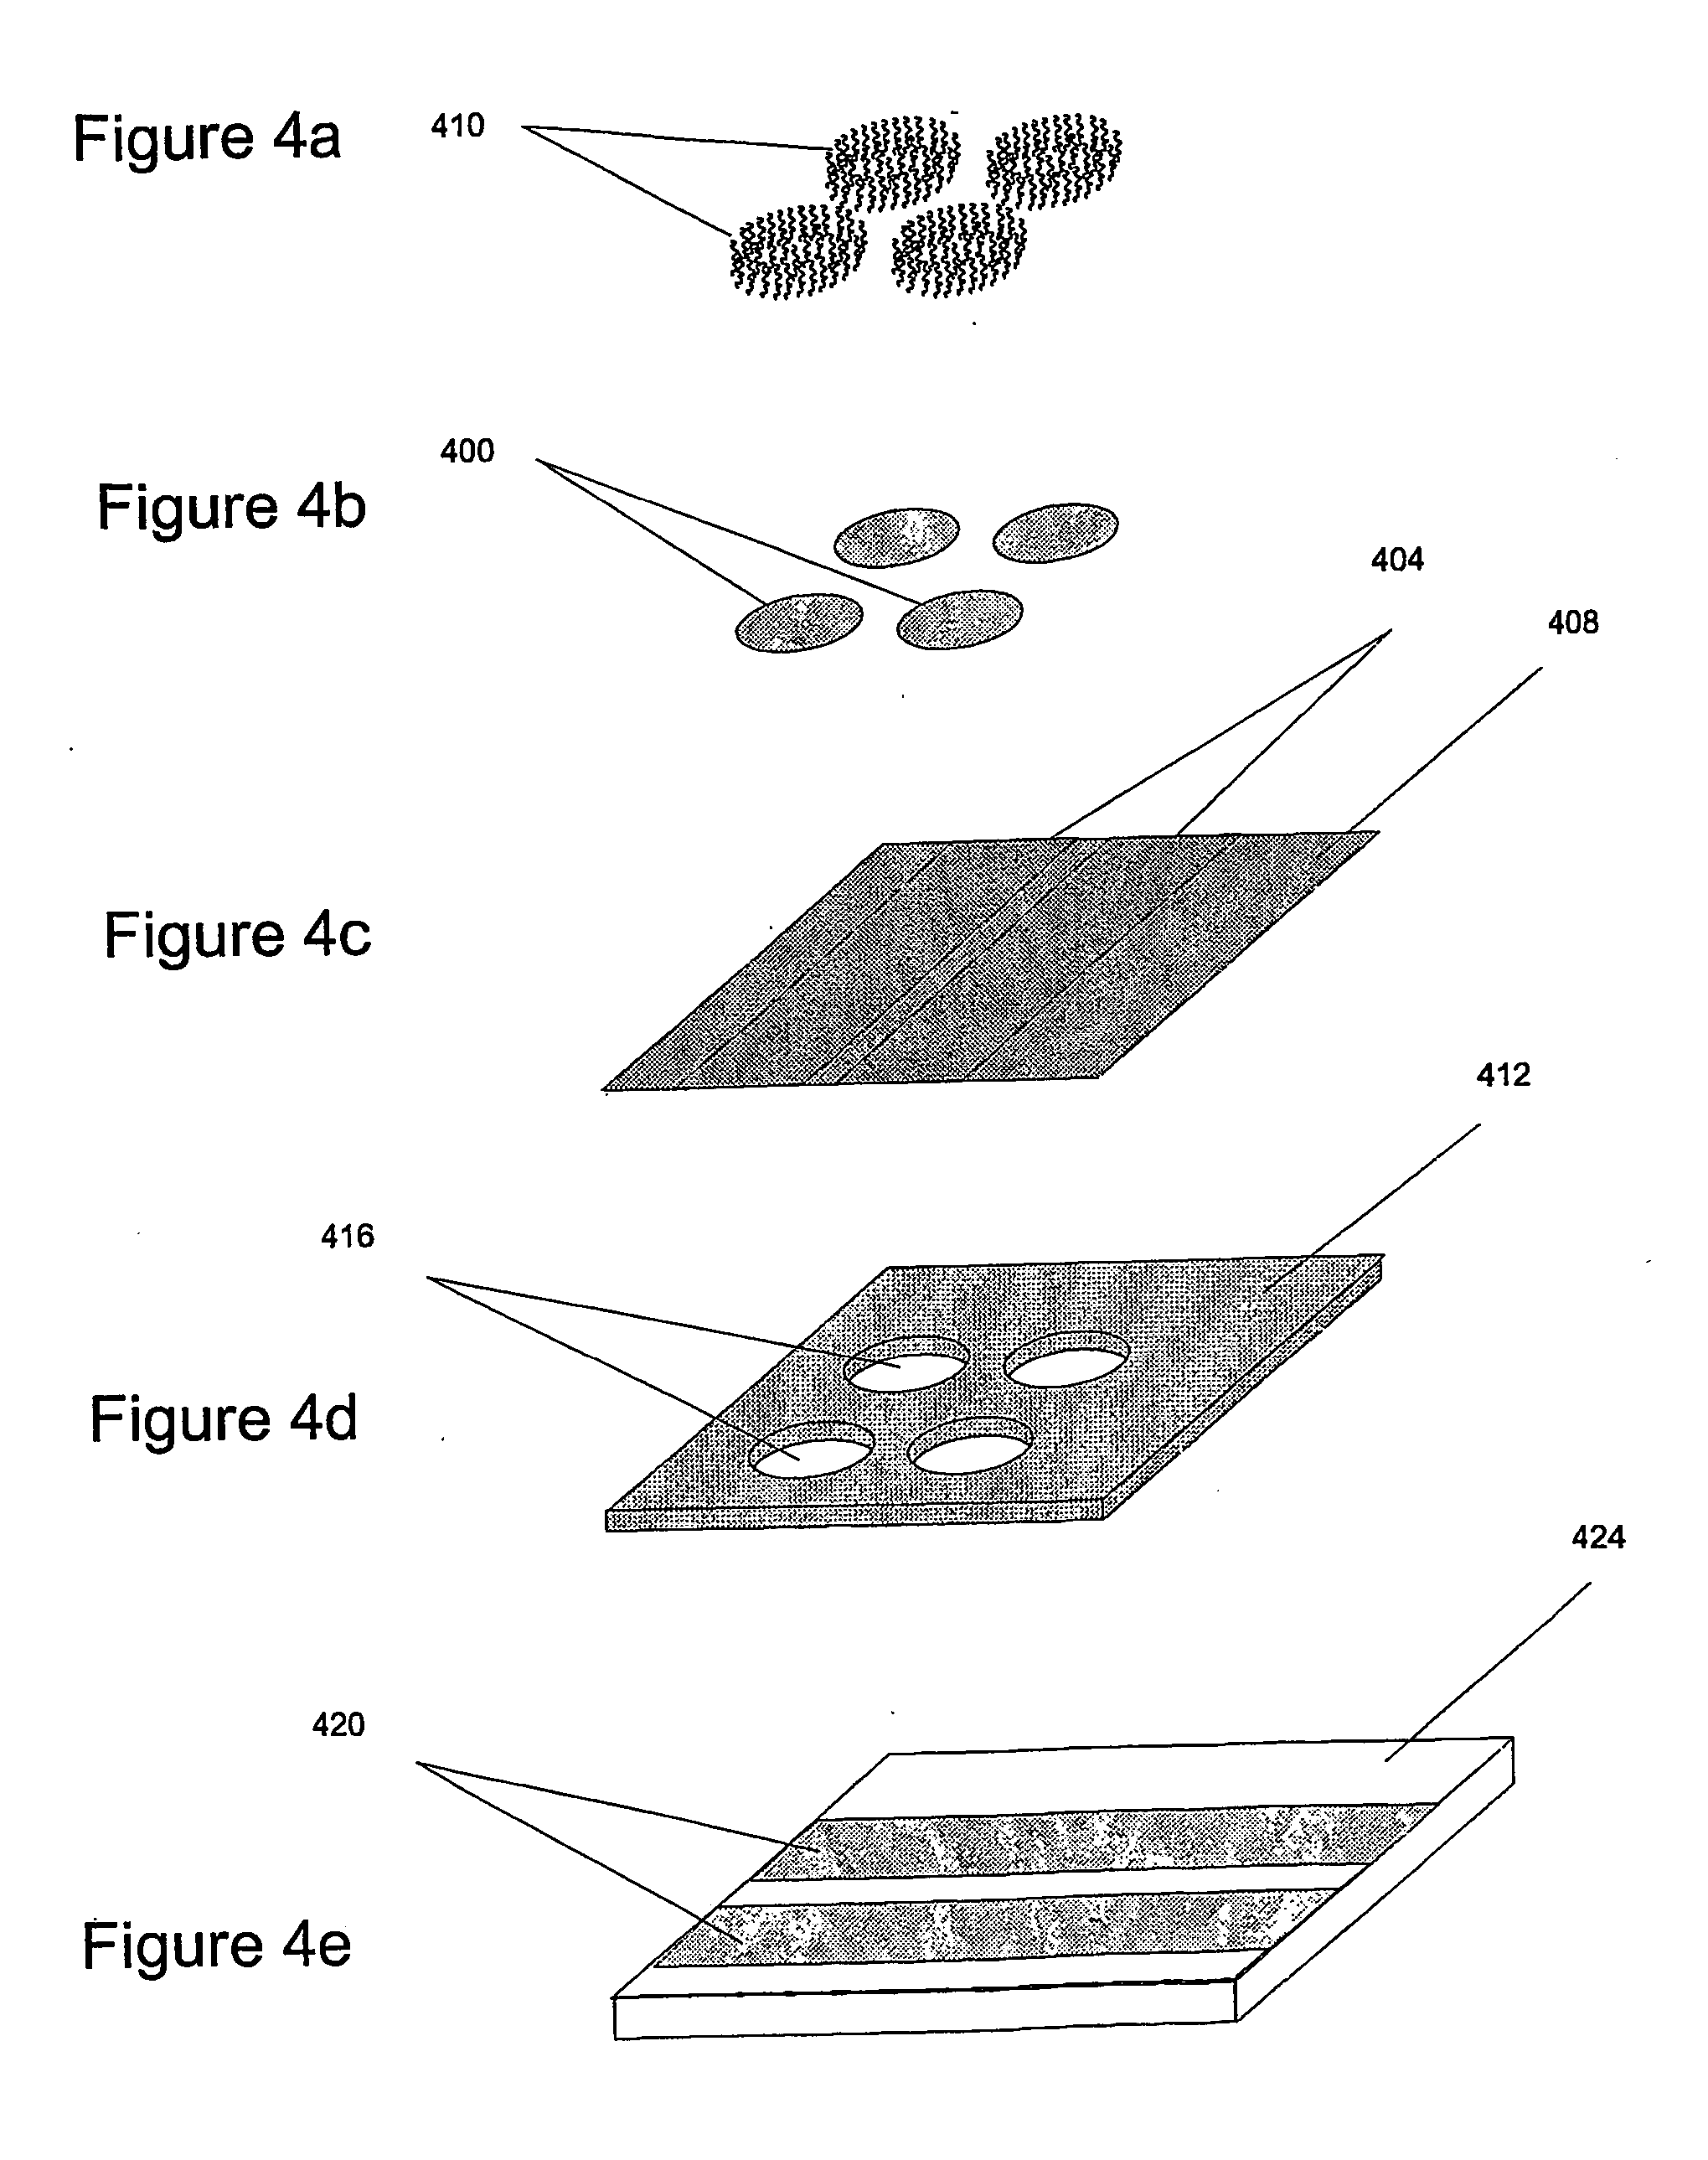 Manufacturing method and readout system for biopolymer arrays